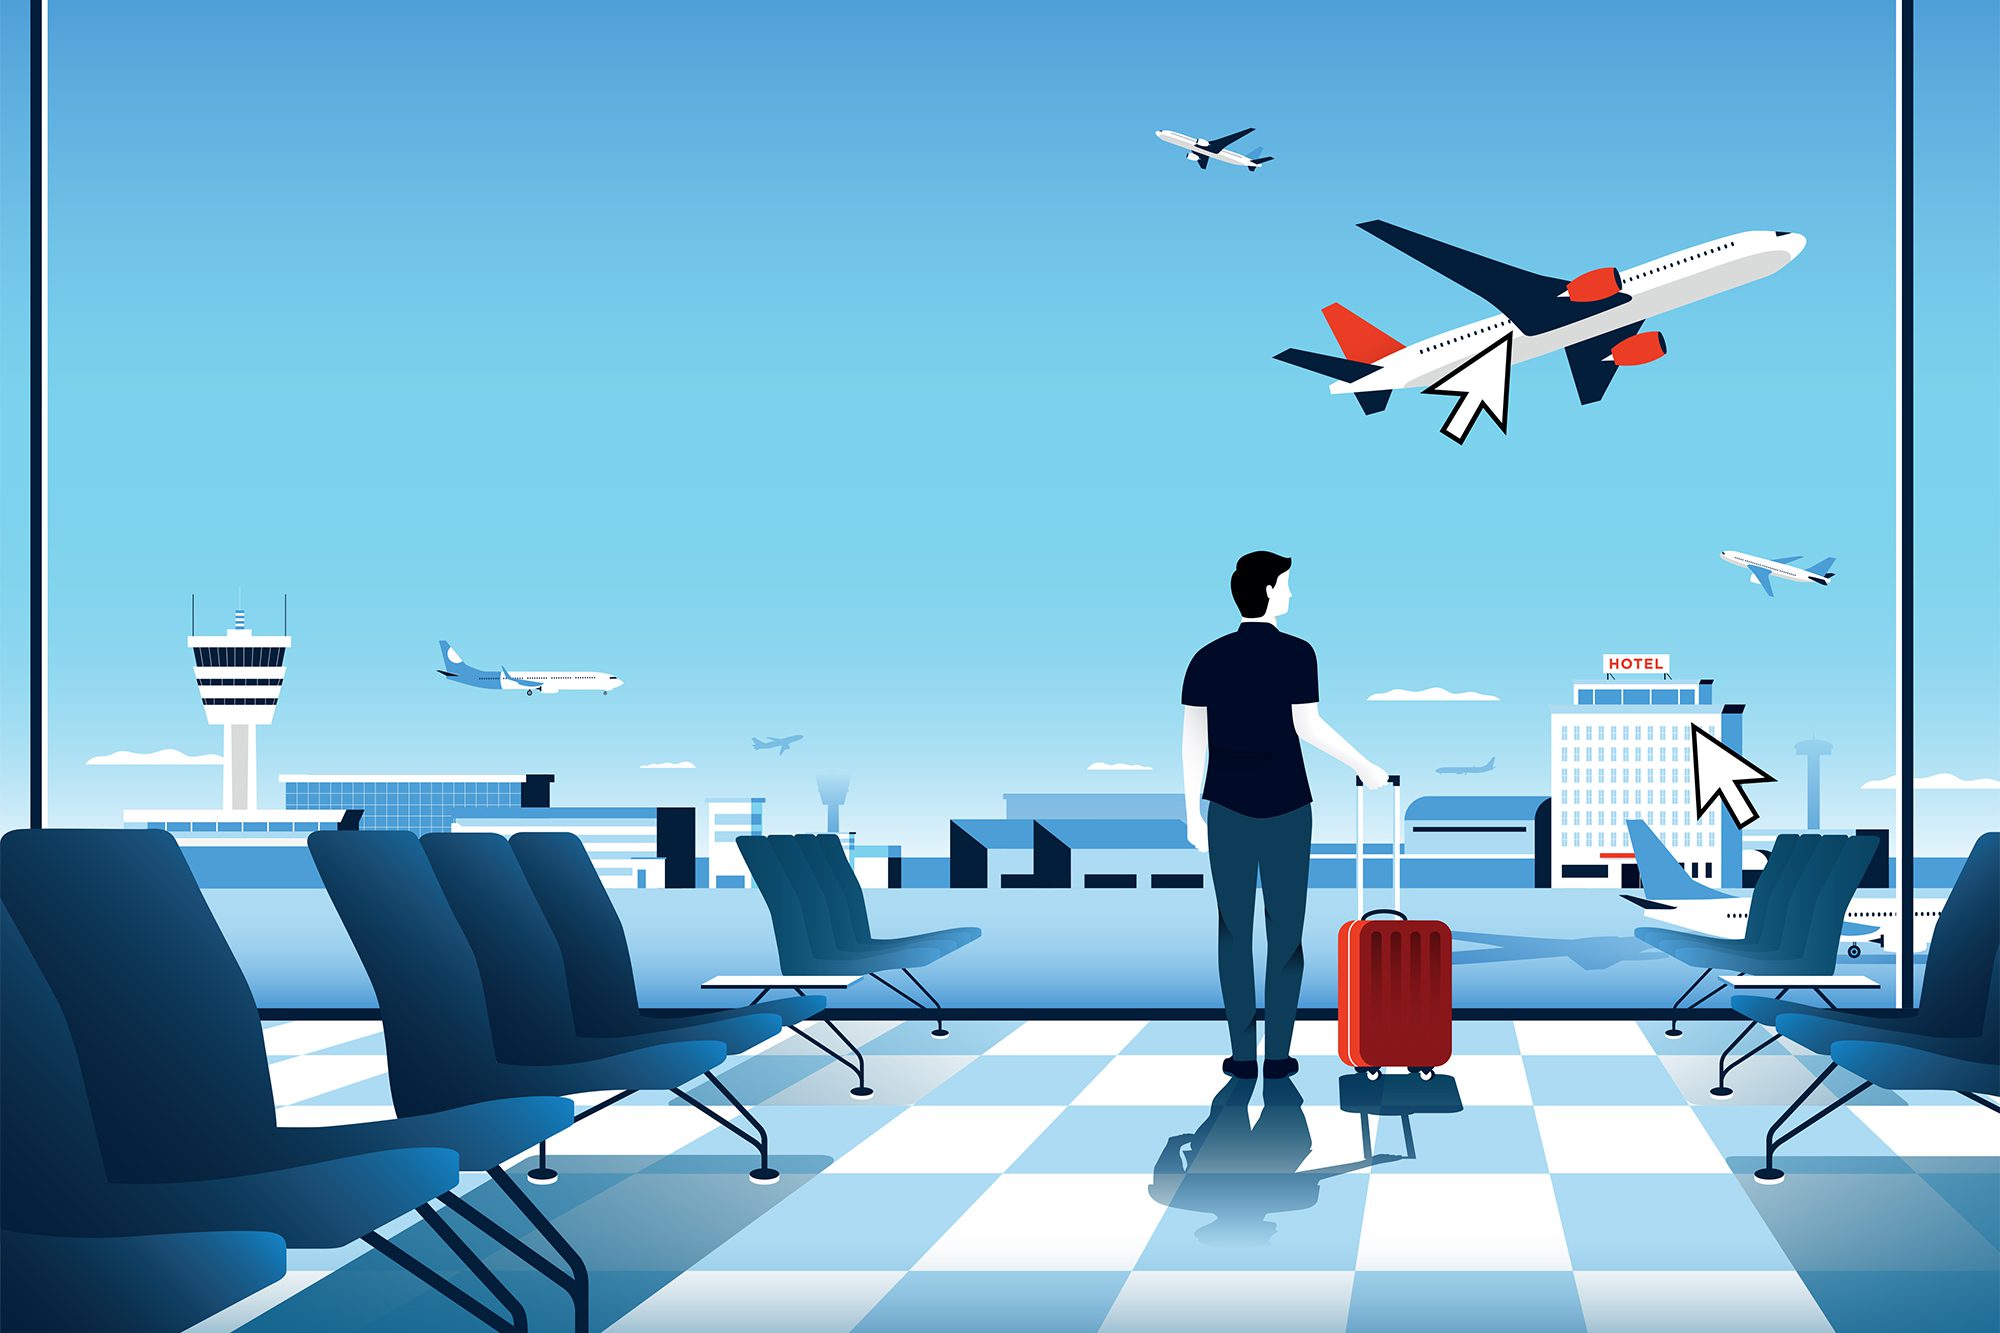 An illustration of a traveler in an airport.